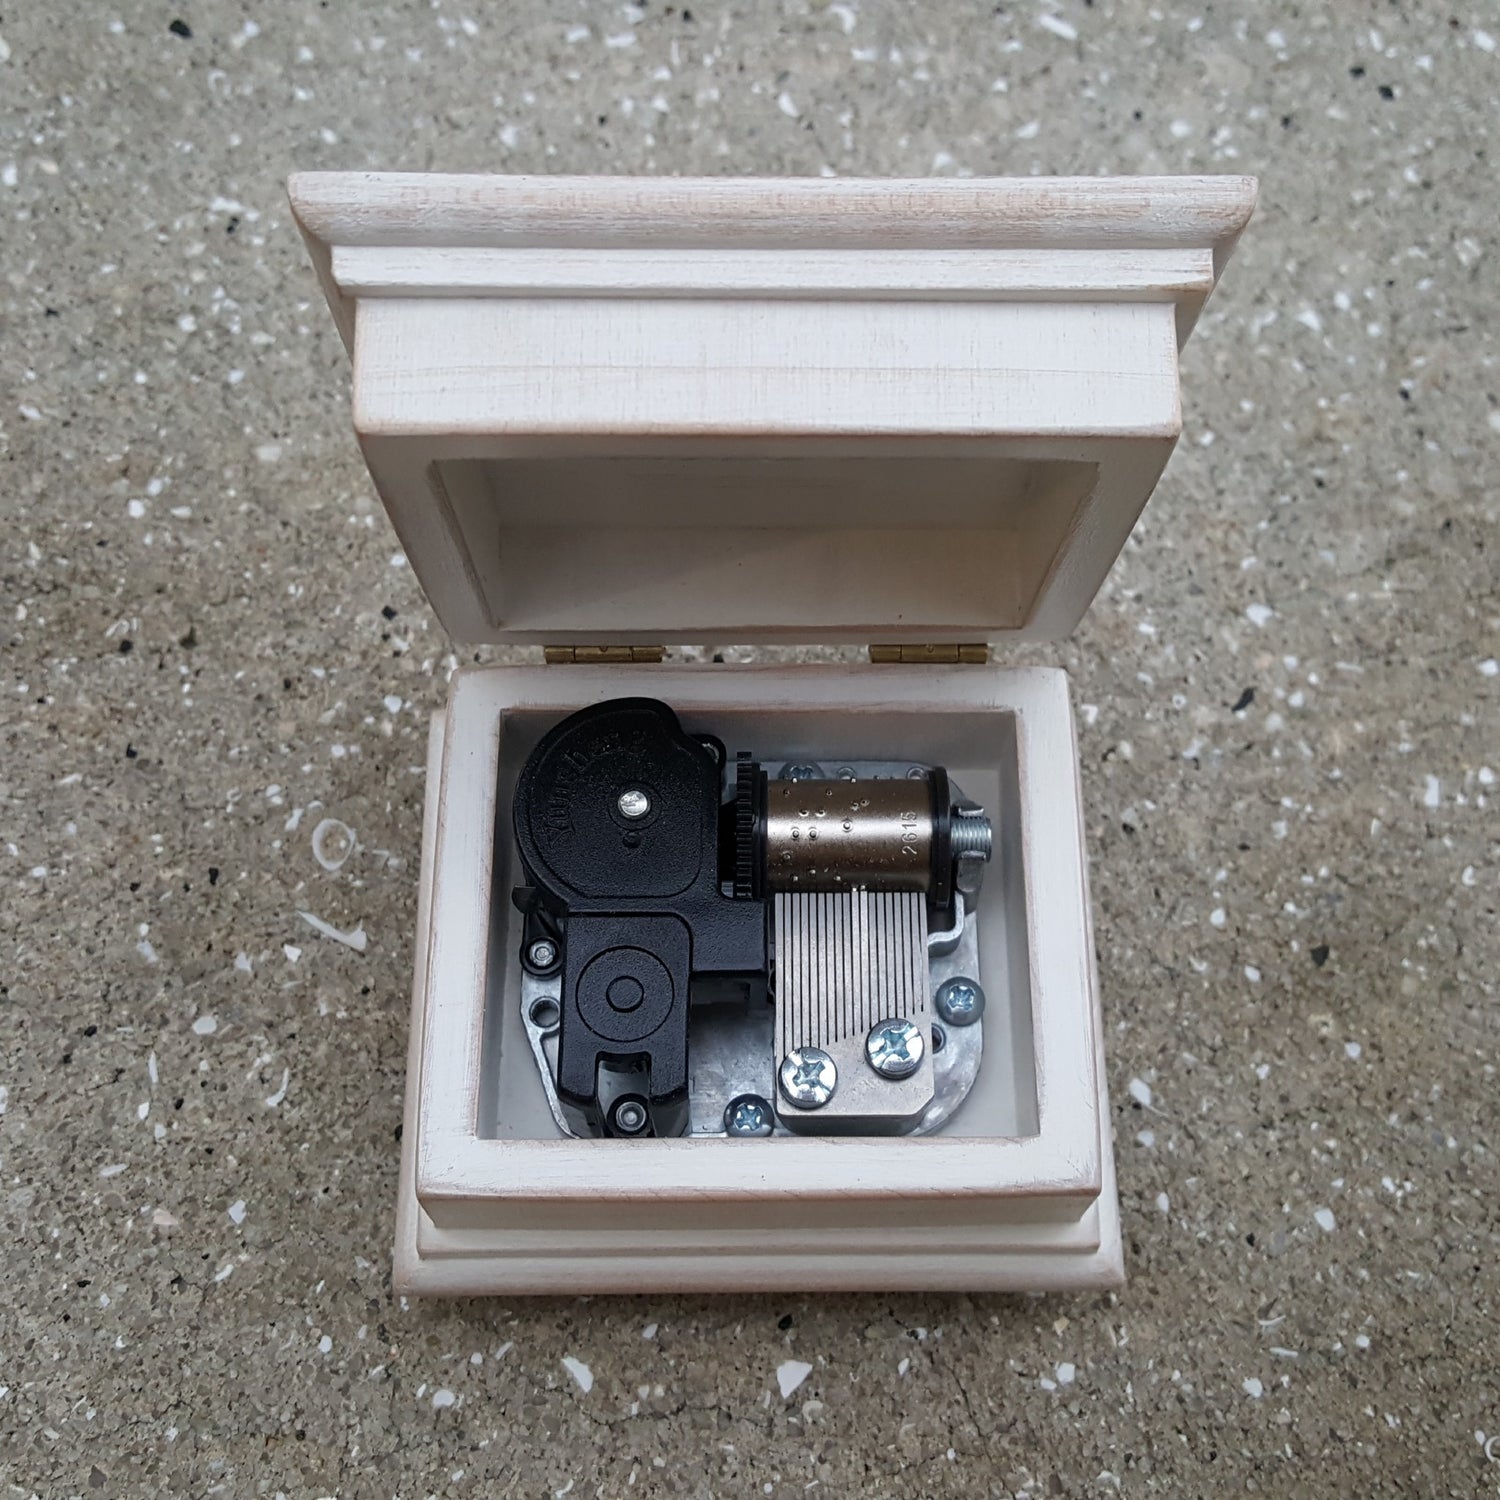 music box with open lid showing music box movement inside